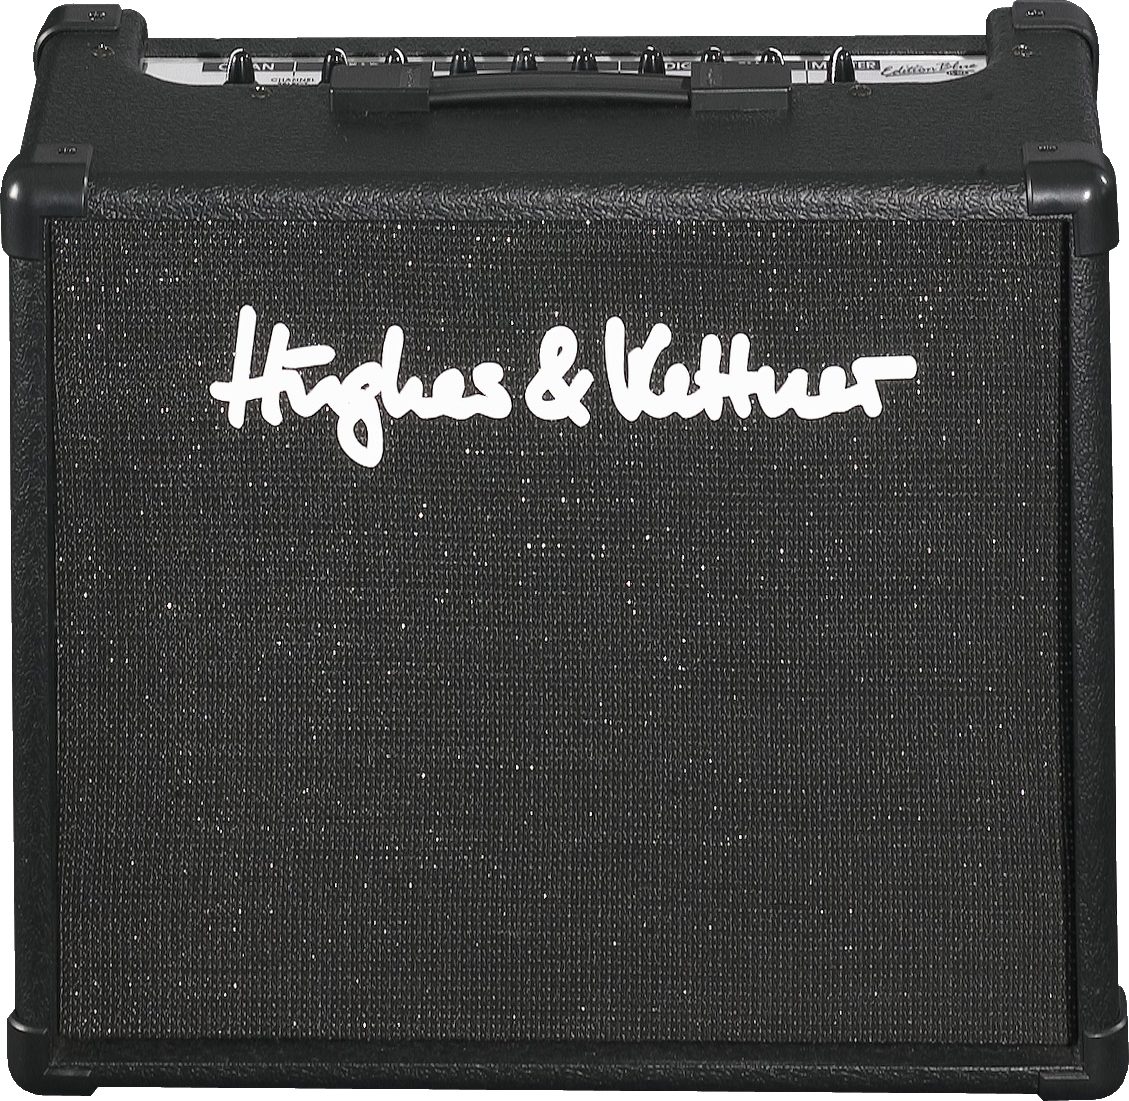 Hughes and Kettner Edition Blue 15 DFX Guitar Combo Amplifier (15 